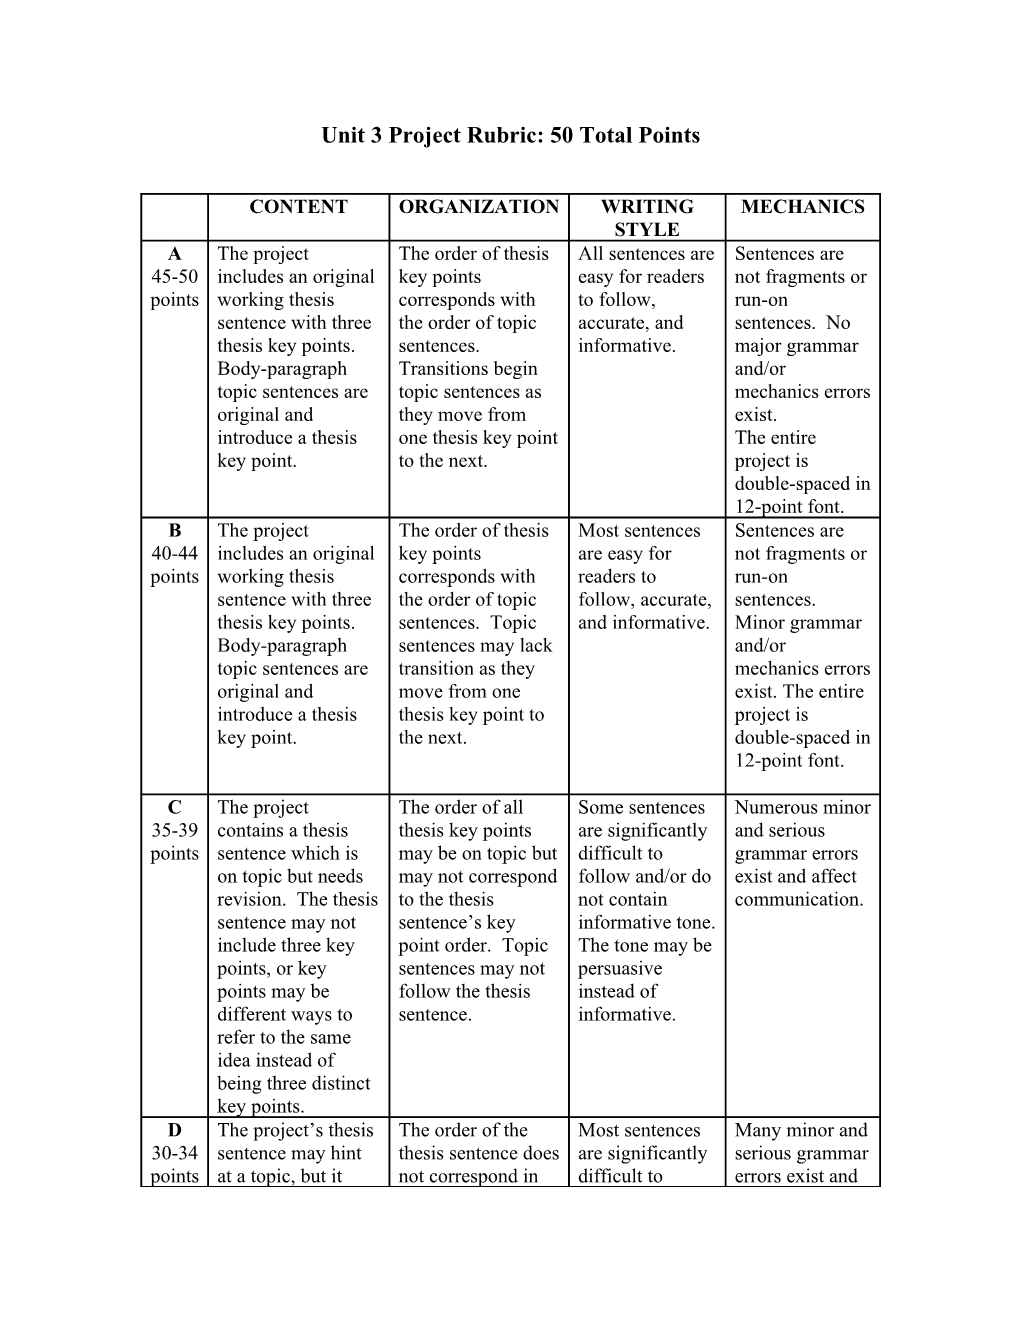 Unit3 Working Thesis Rubric